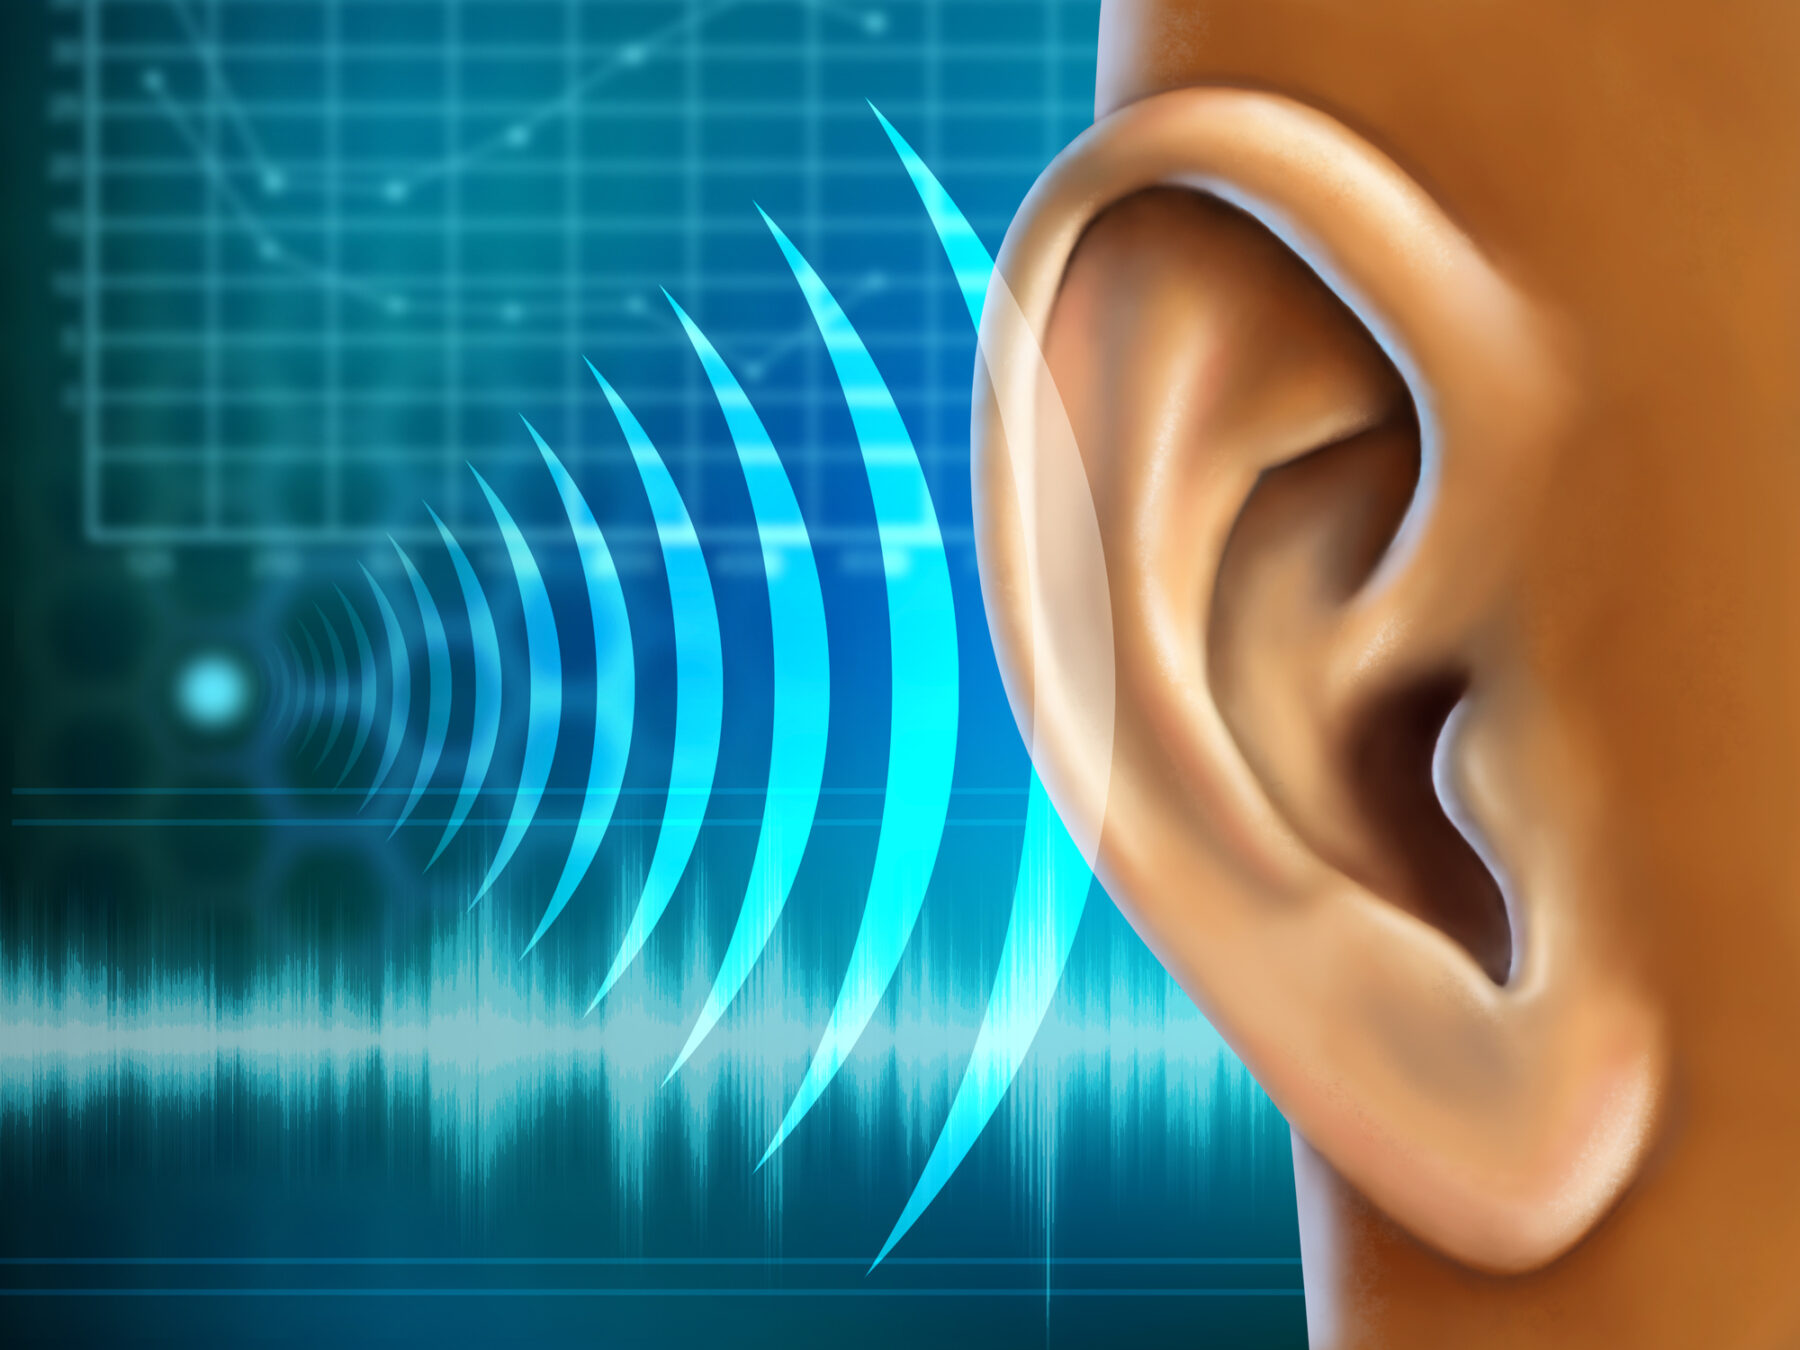 Hearing loss being tested as part of functional medicine